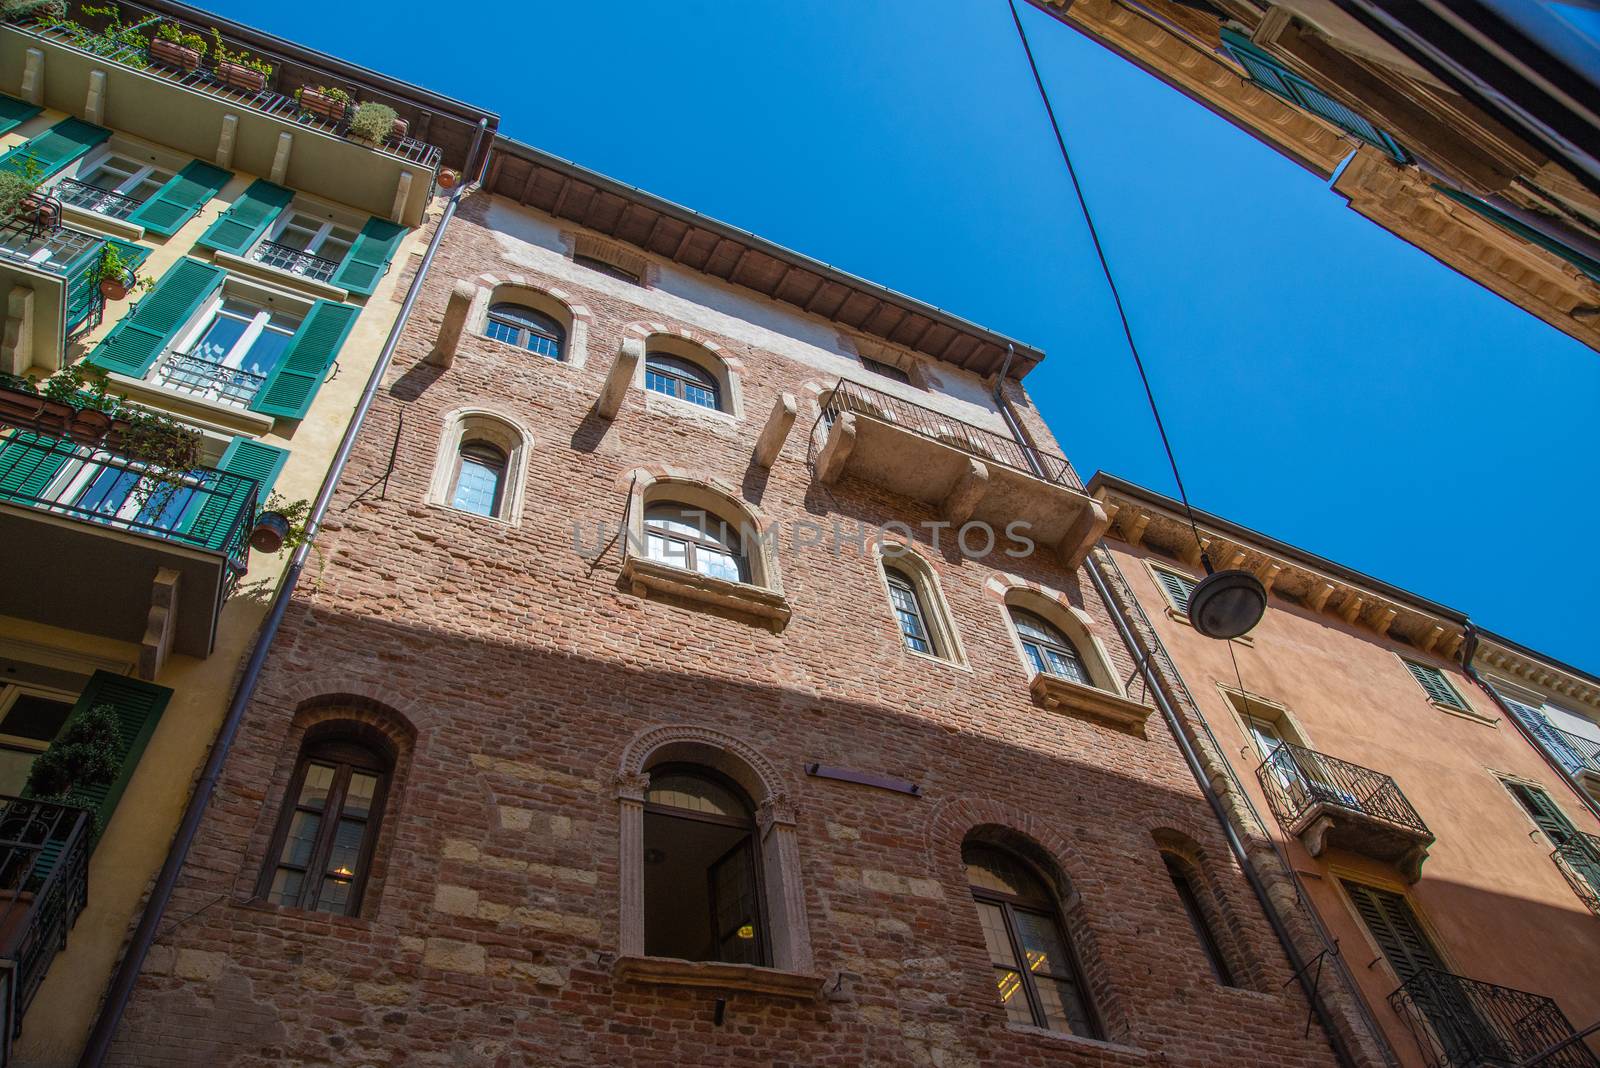 Verona, Veneto/Italy - 18.08.2020: View from a narrow alley of a historic house front up to the sky with antique restored houses made of brick, metal and wood